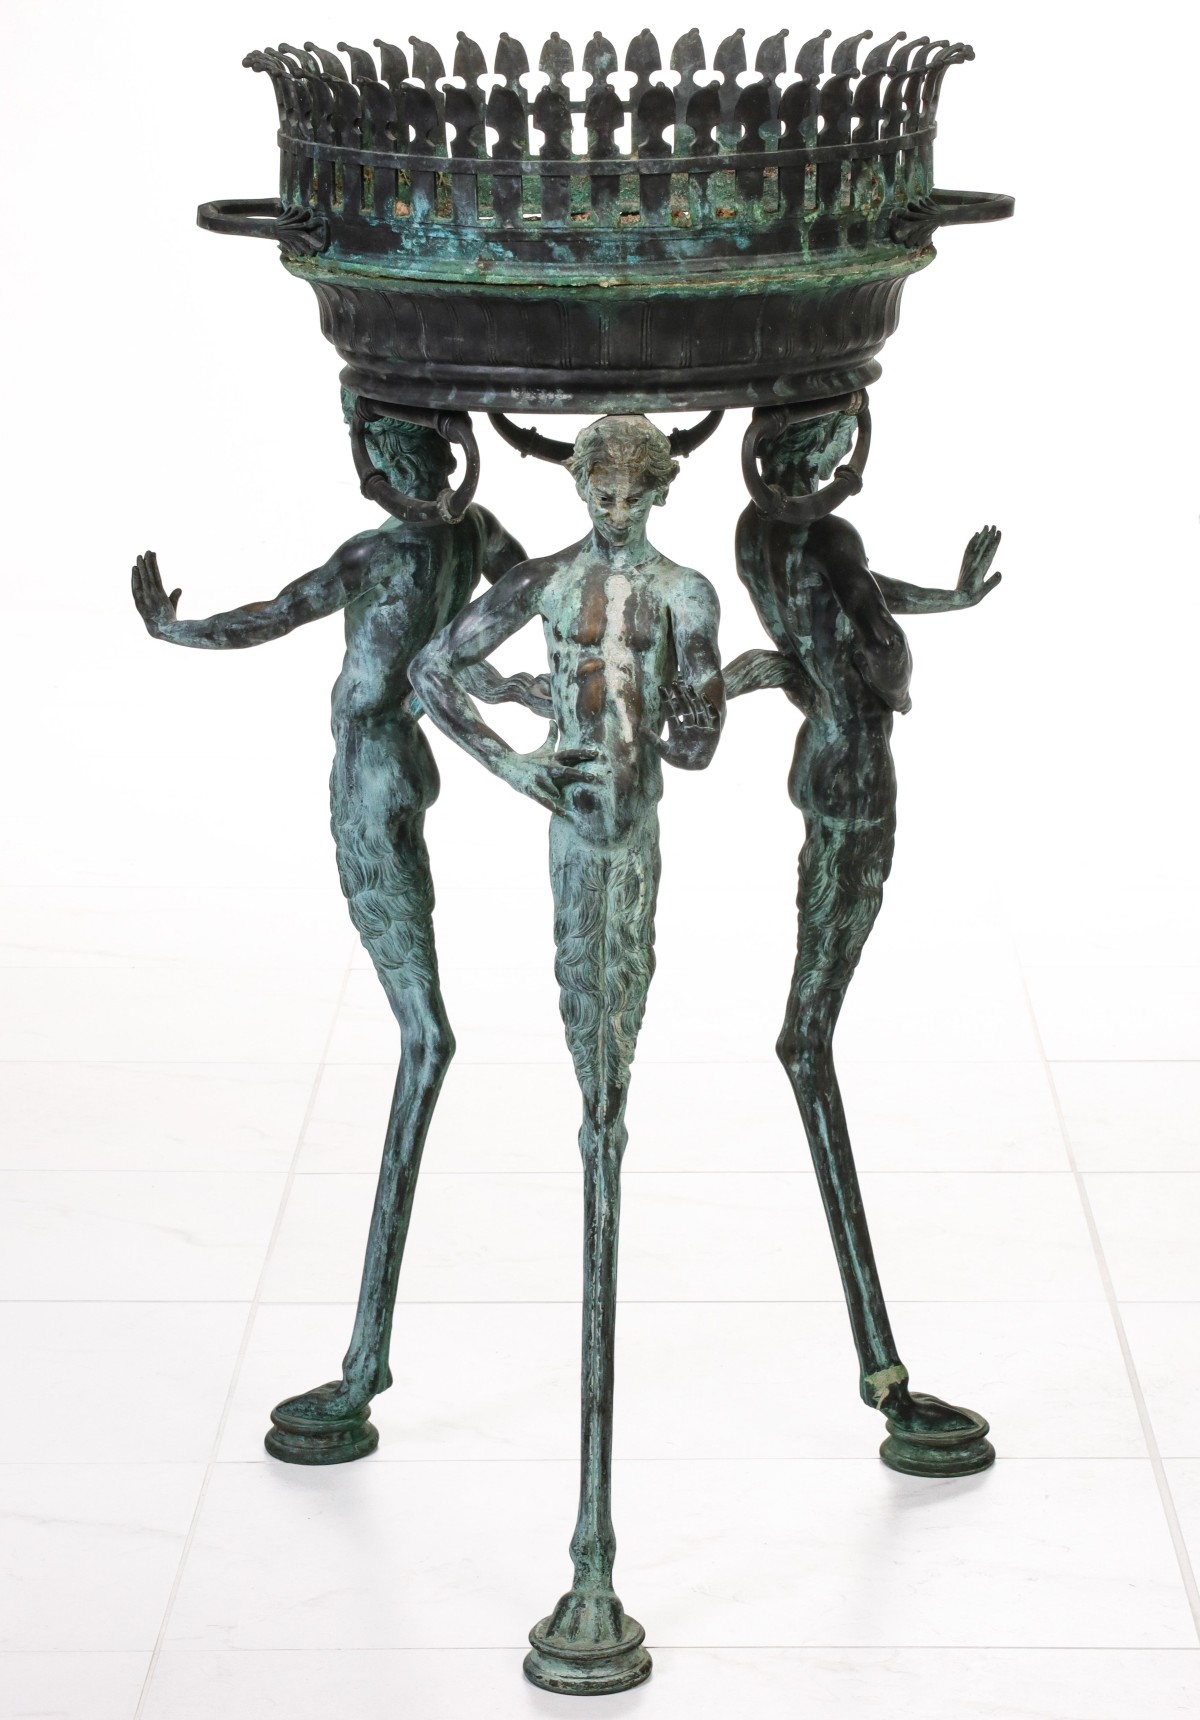 A LATE 19TH C. ITALIAN POMPEIAN STYLE BRONZE STAND